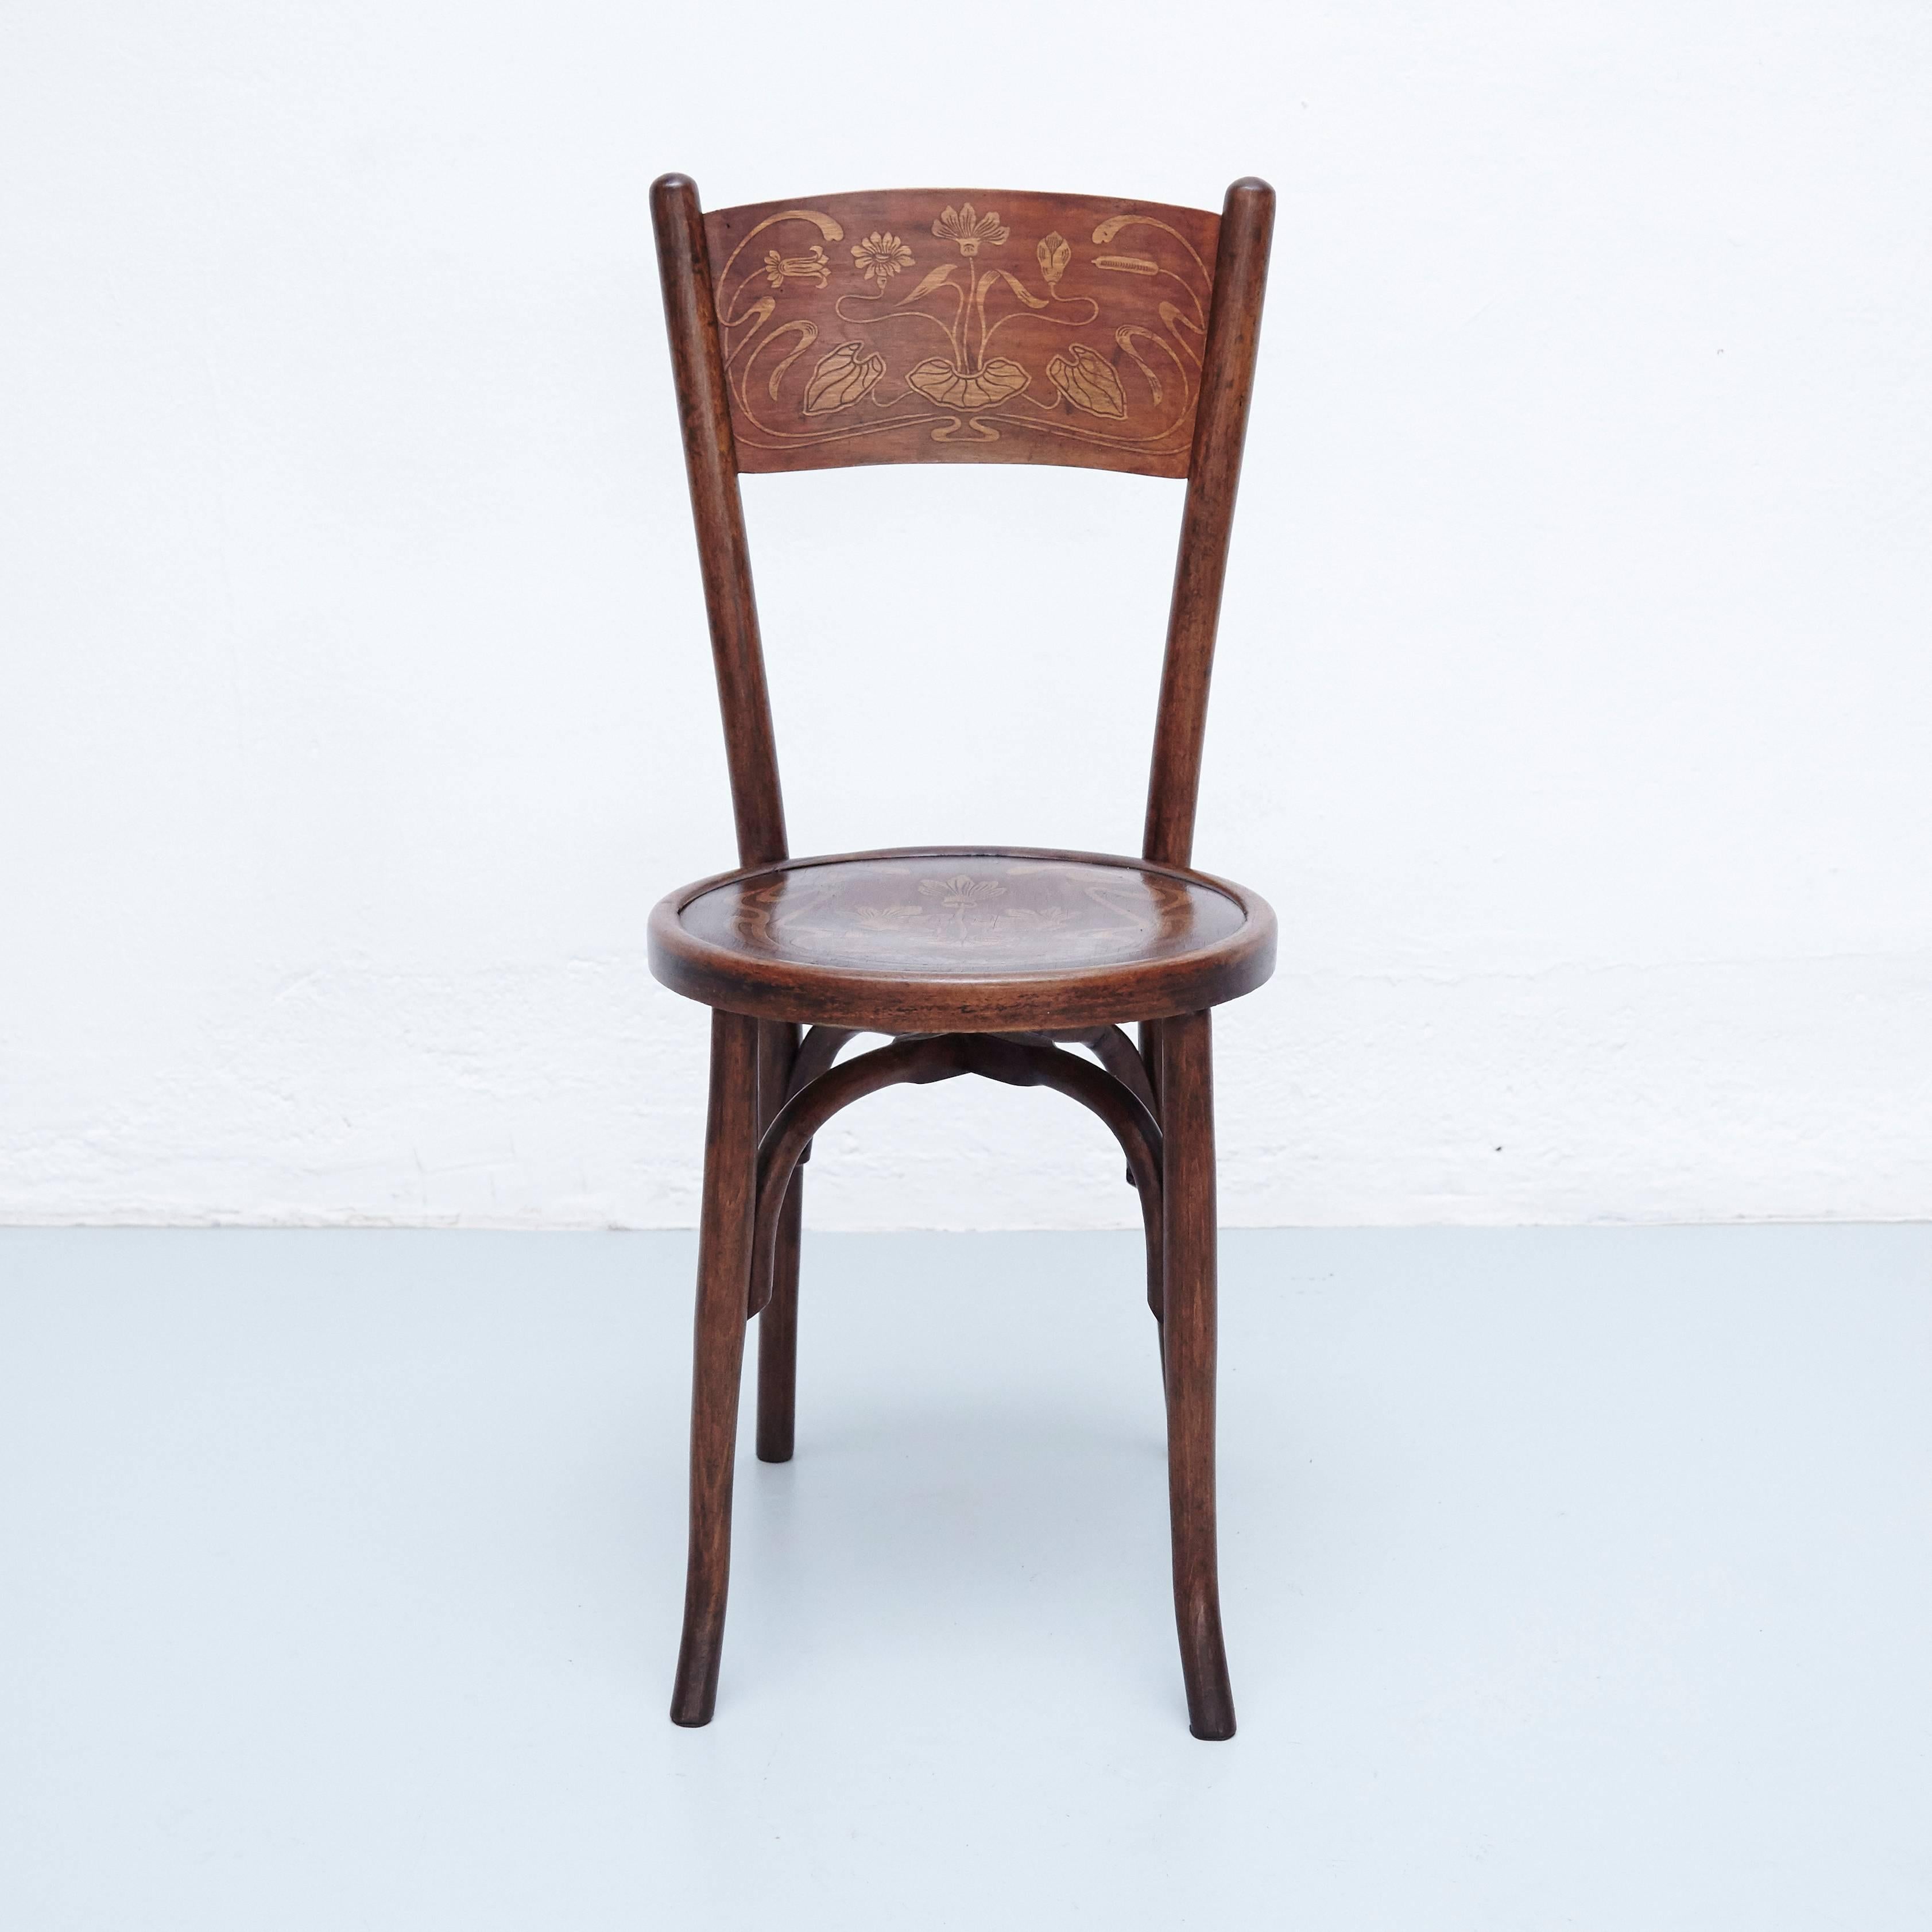 Pair of chairs in the style of Thonet by Codina, circa 1900
Manufactured in Spain.
Dark bentwood.

In good original condition, with minor wear consistent with age and use, preserving a beautiful patina.